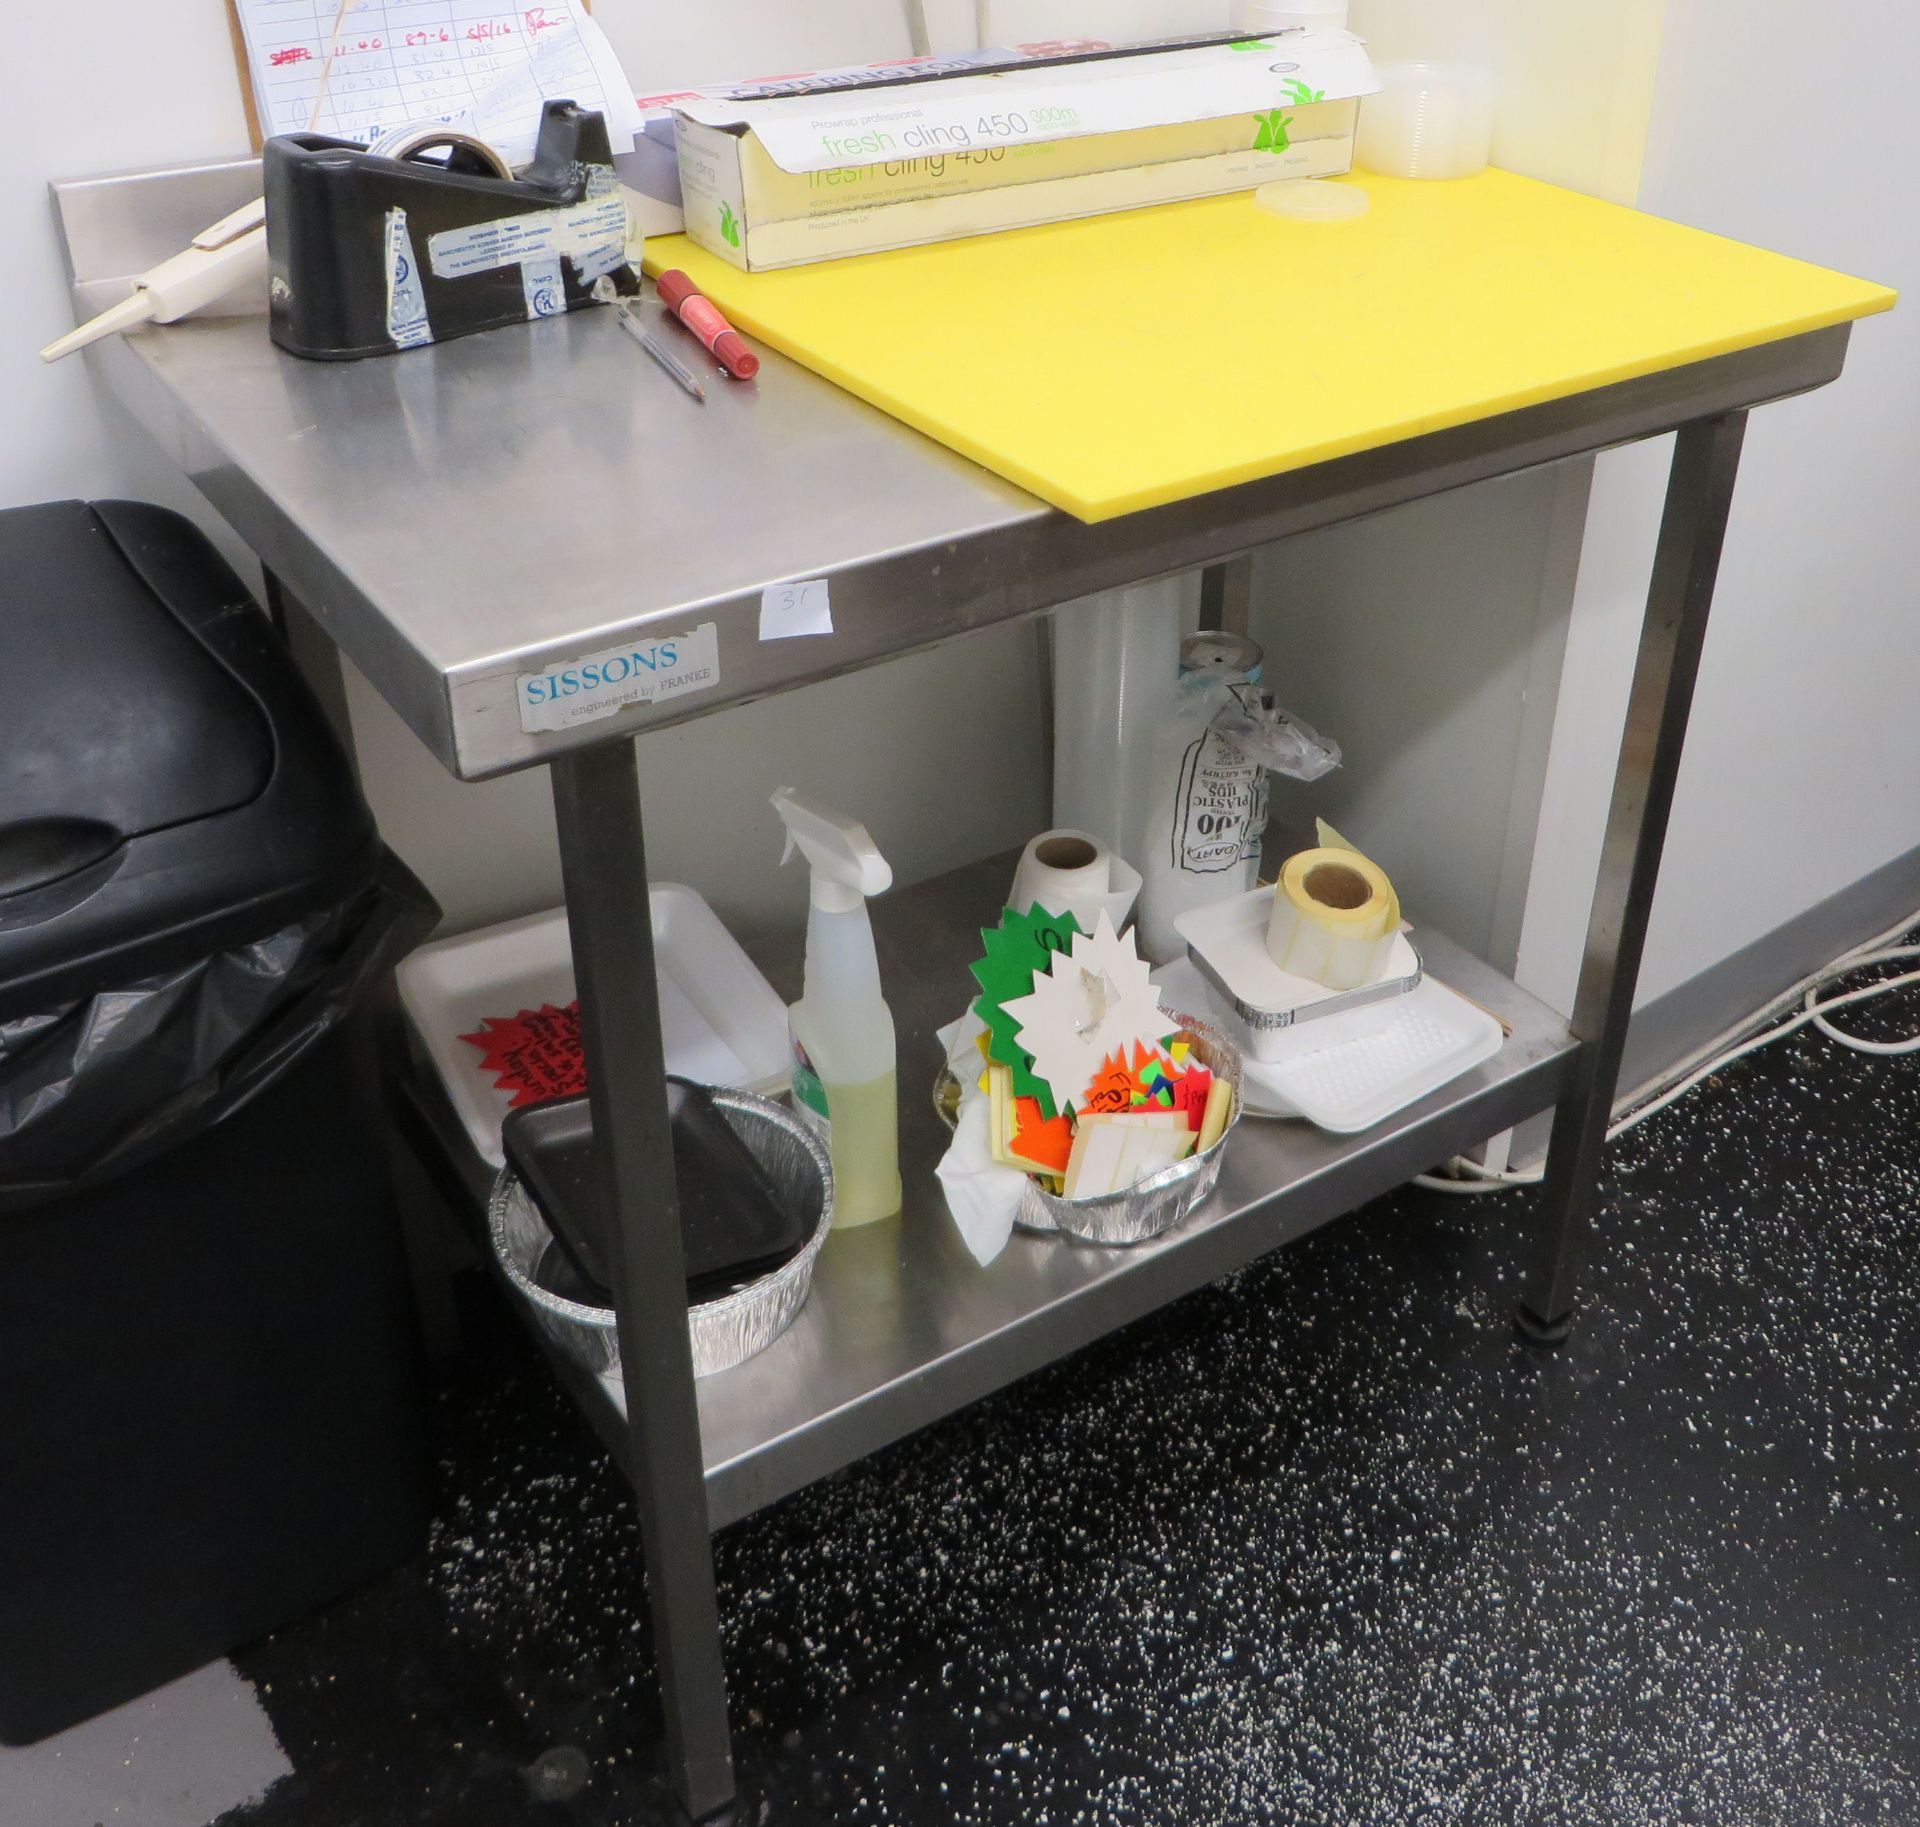 1 x Sissons Stainless Steel Preparation Table - Ref: 031 - CL173 - Location: Altrincham WA15